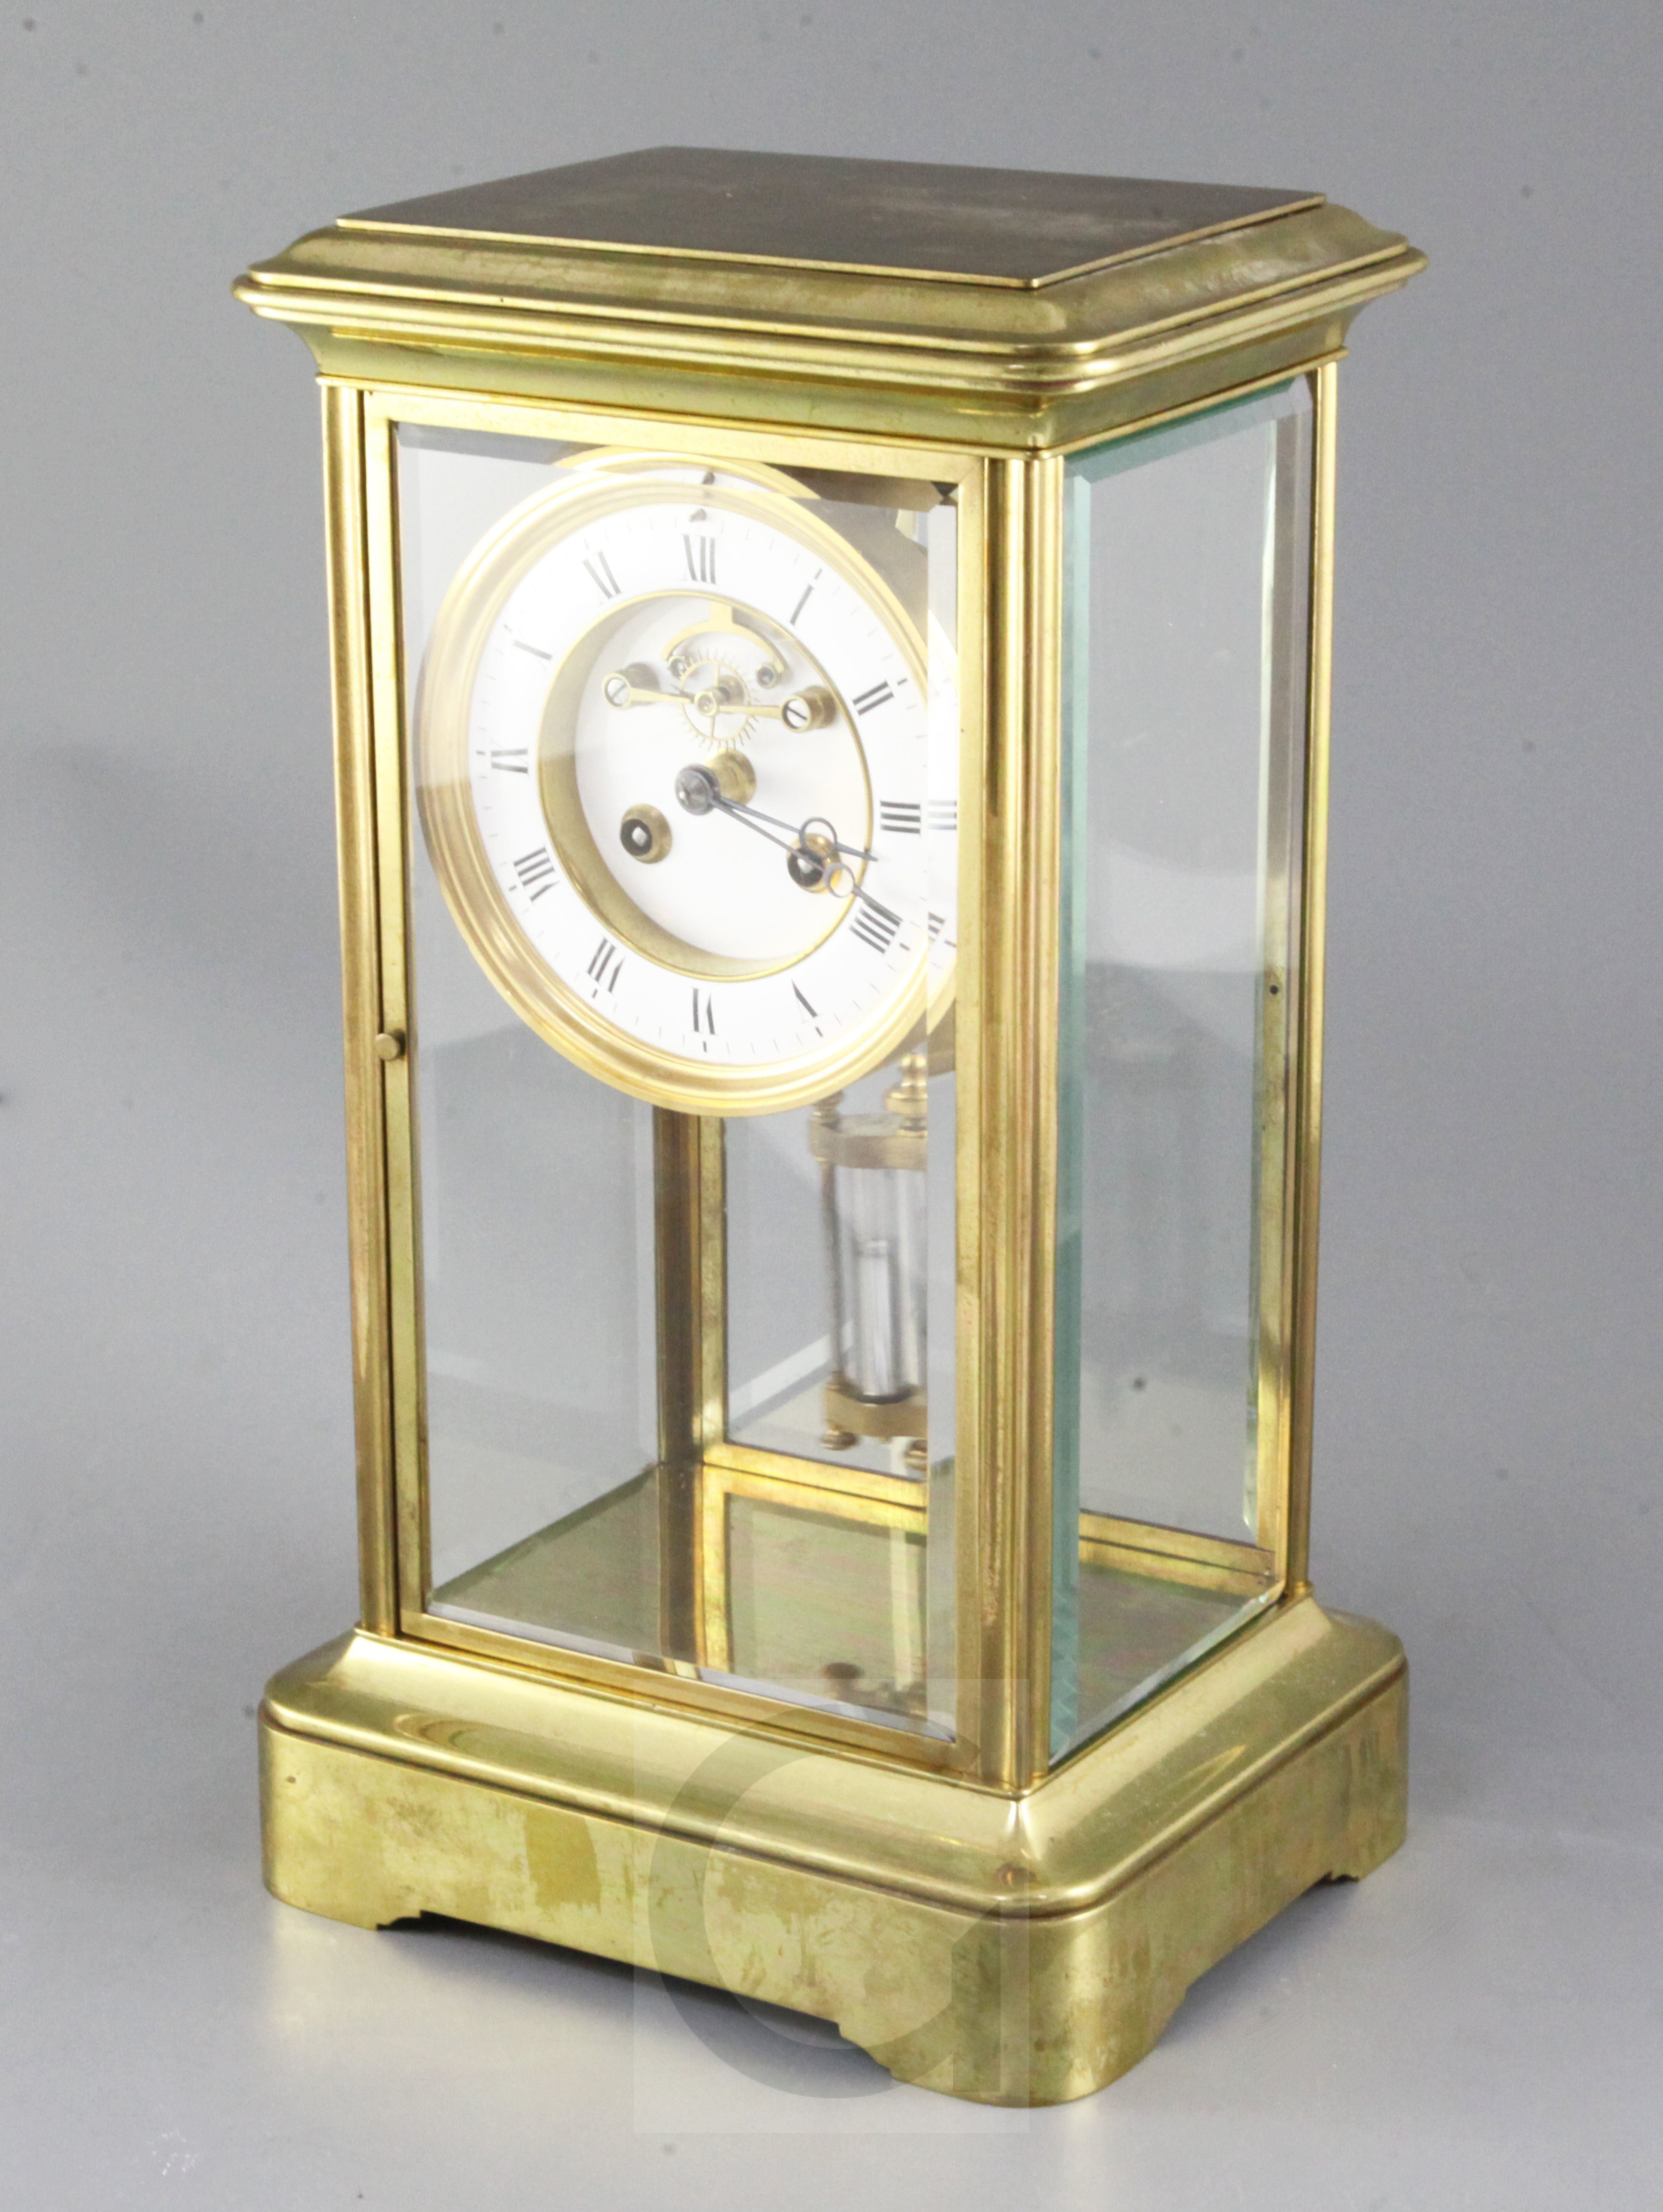 An early 20th century French four glass mantel clock, with visible escapement and mercury